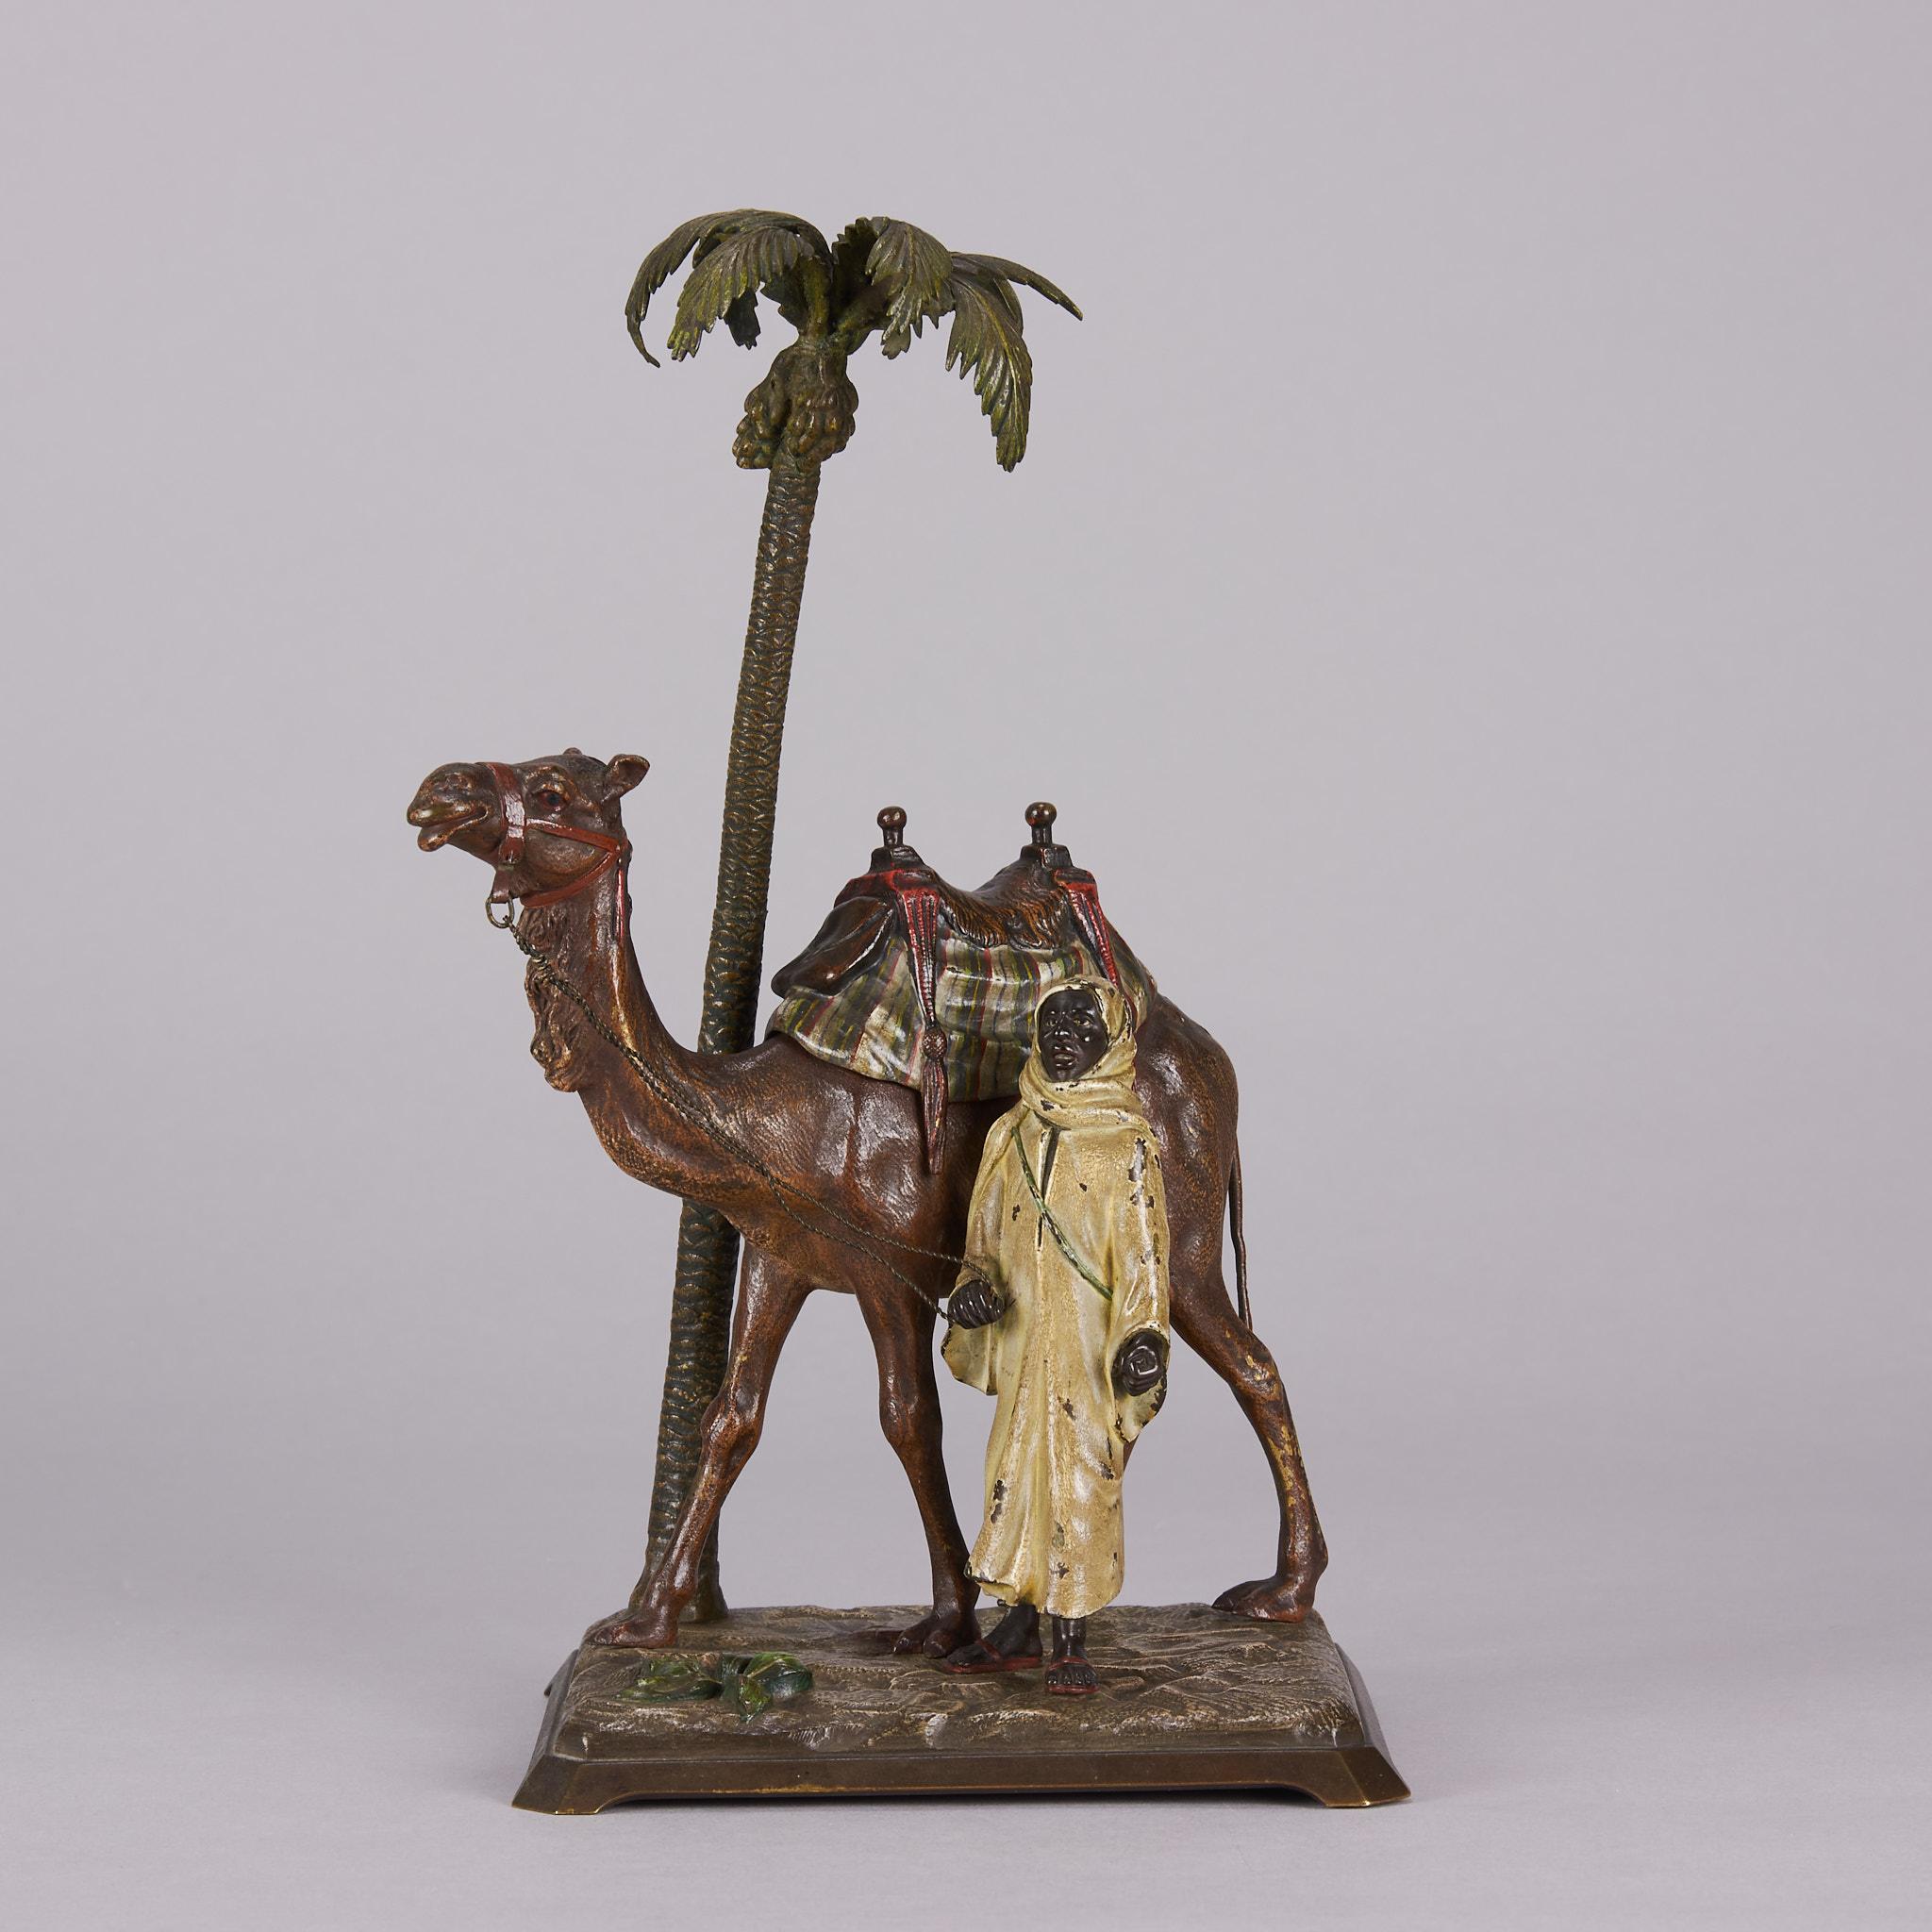 A striking early 20th century Austrian bronze group of an Bedouin man standing next to his camel by the side of a palm tree on a naturalistic raised base, the saddle on the camel opening to reveal an inkwell with original fitting. The surface of the